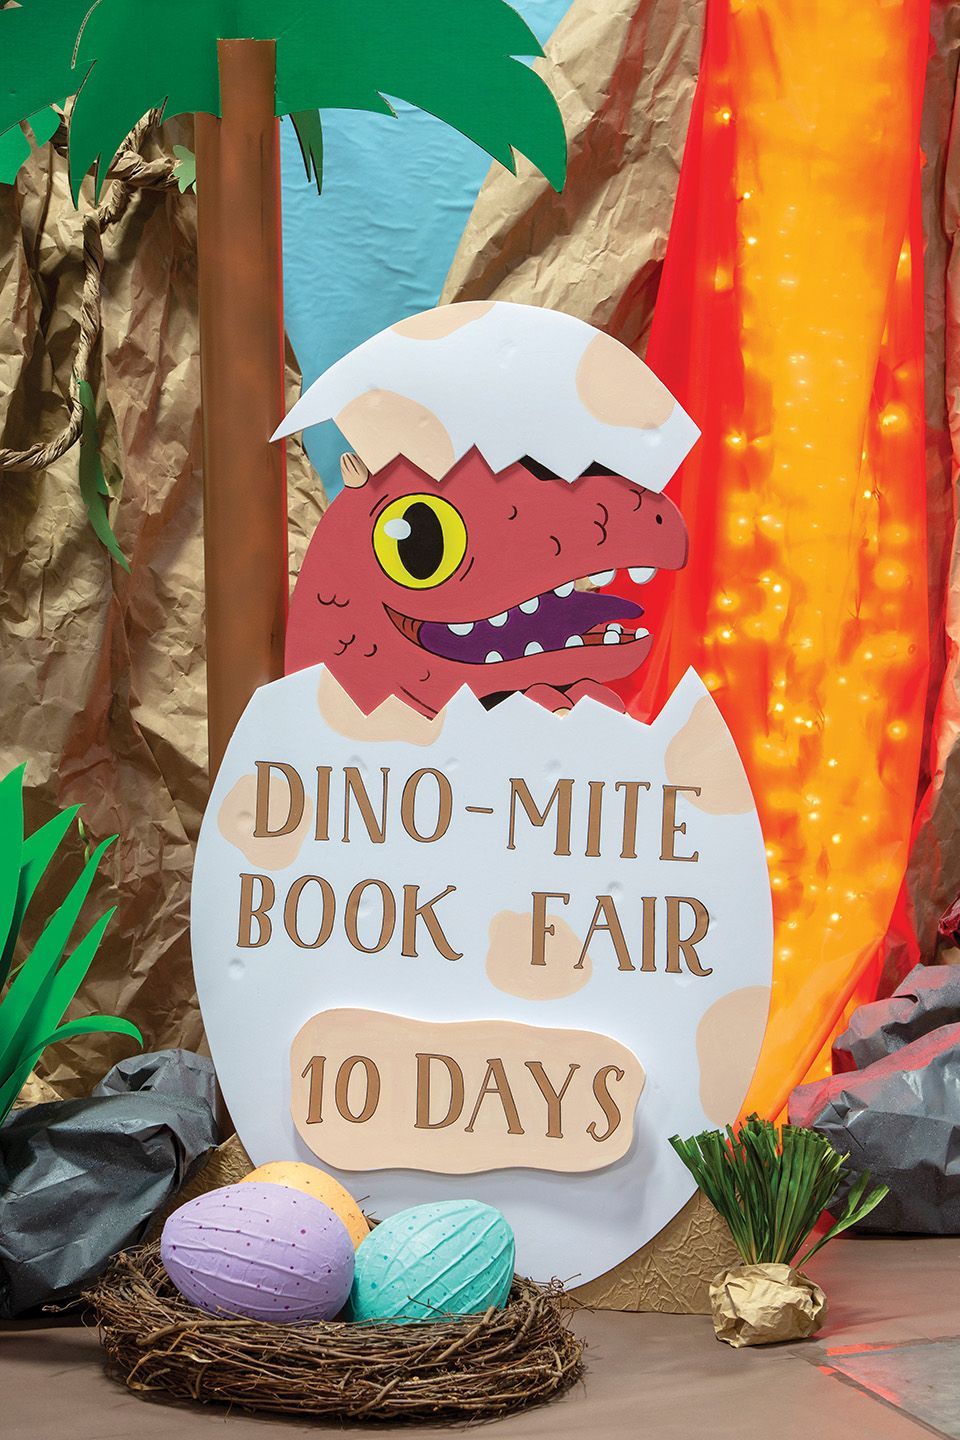 Build Fair anticipation by displaying a fun countdown sign 30 days before the Book Fair opening. Toolkit keyword: COUNTDOWN SIGN -   24 build a dinosaur crafts
 ideas